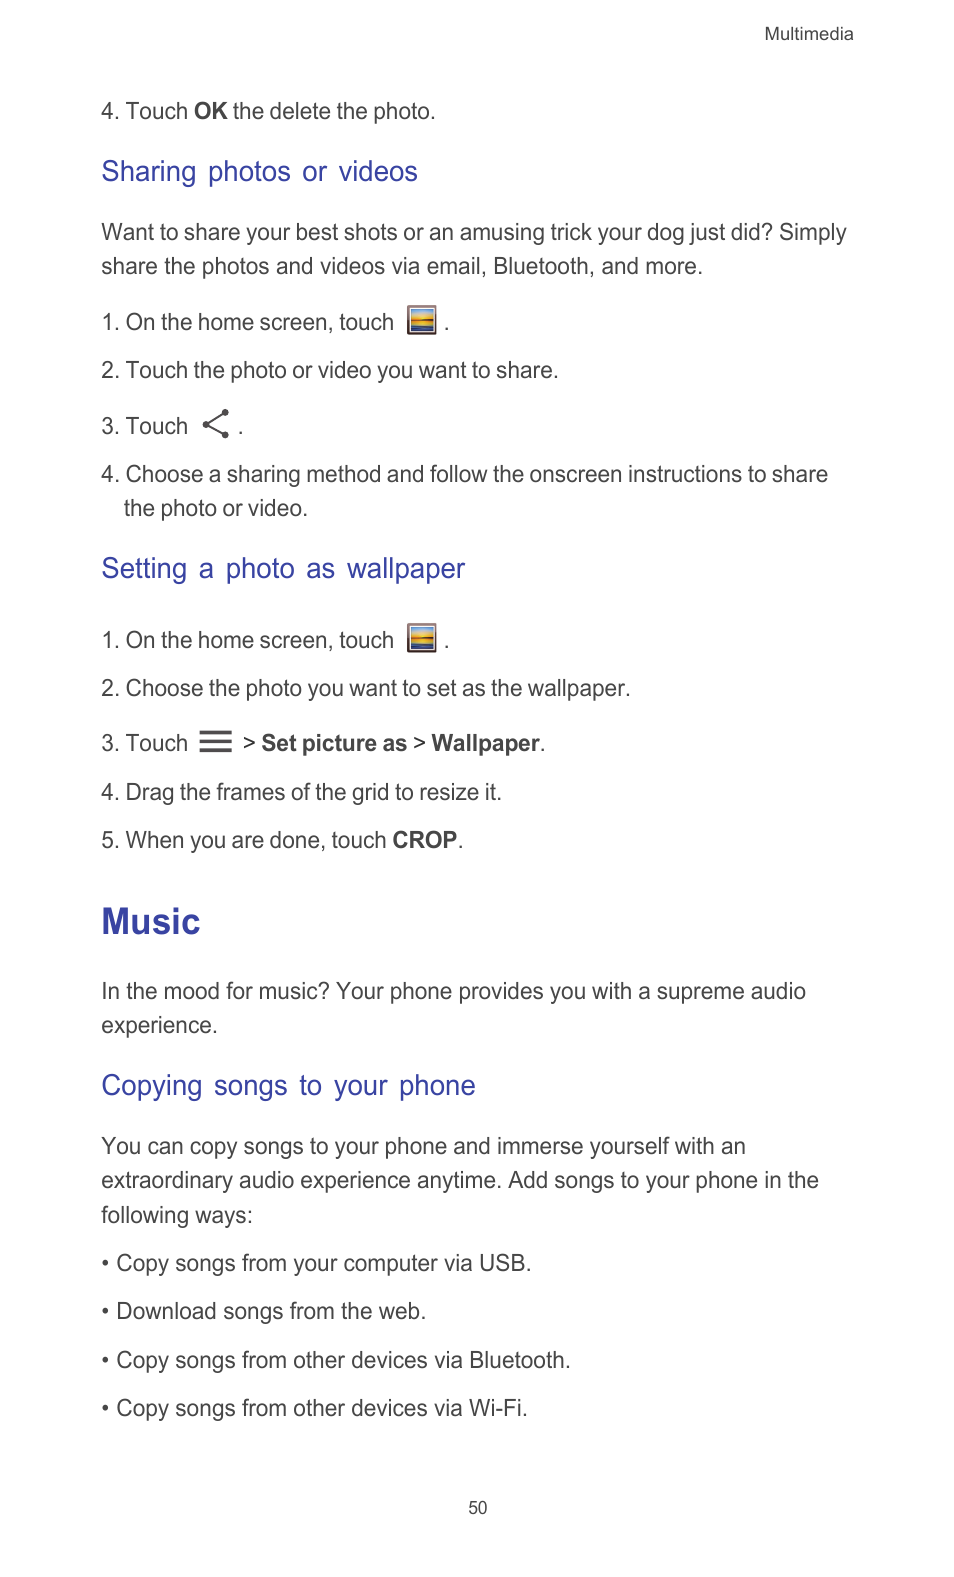 Sharing photos or videos, Setting a photo as wallpaper, Music | Copying songs to your phone | Huawei Ascend G510 User Guide User Manual | Page 55 / 93